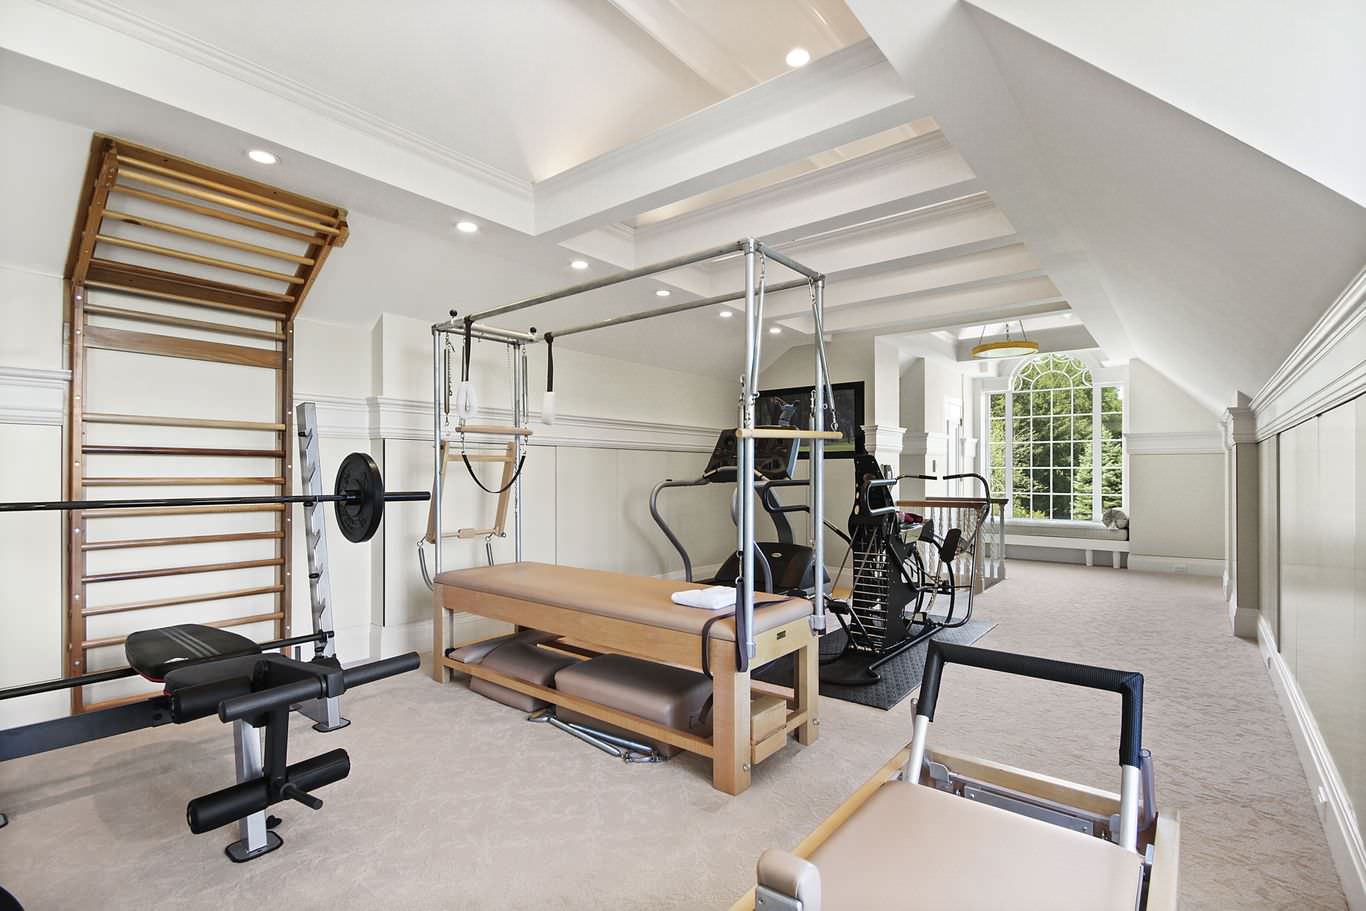 https://st.hzcdn.com/simgs/pictures/home-gyms/residence-greenwich-ct-colangelo-associates-architects-img~c49131ea064e2ad5_14-1987-1-a6f57f4.jpg